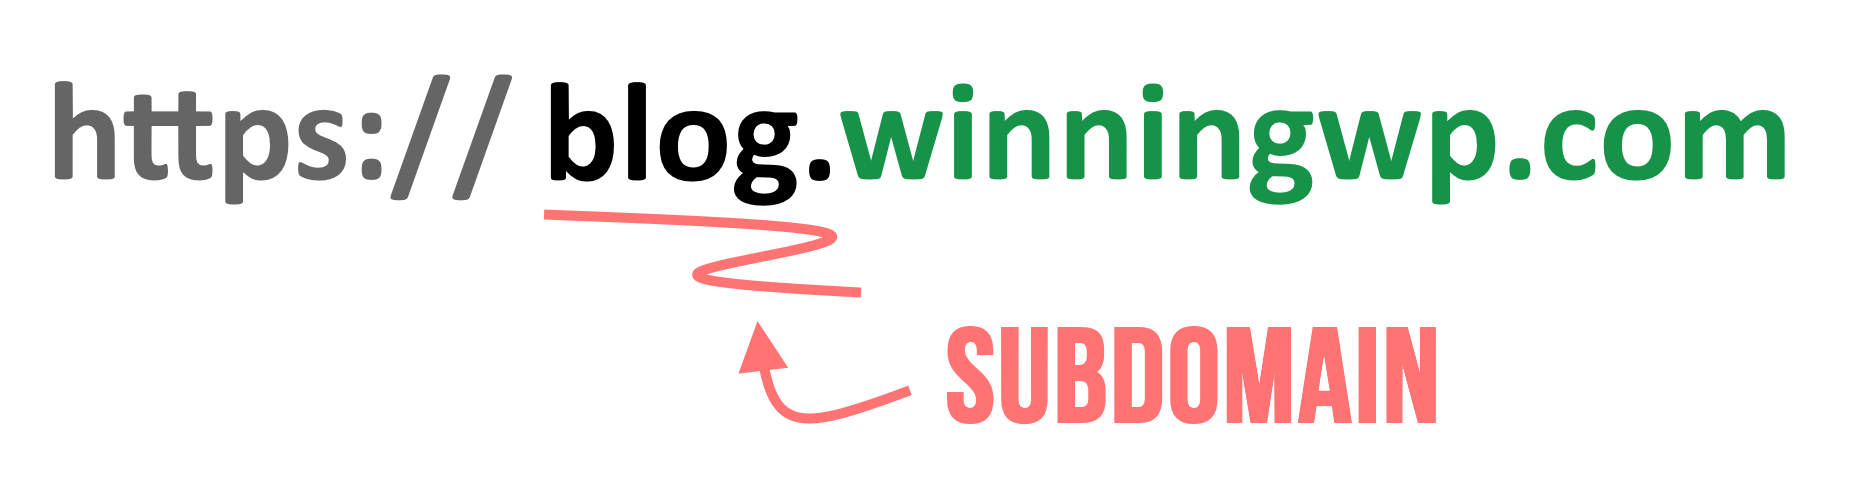 What Is a Subdomain